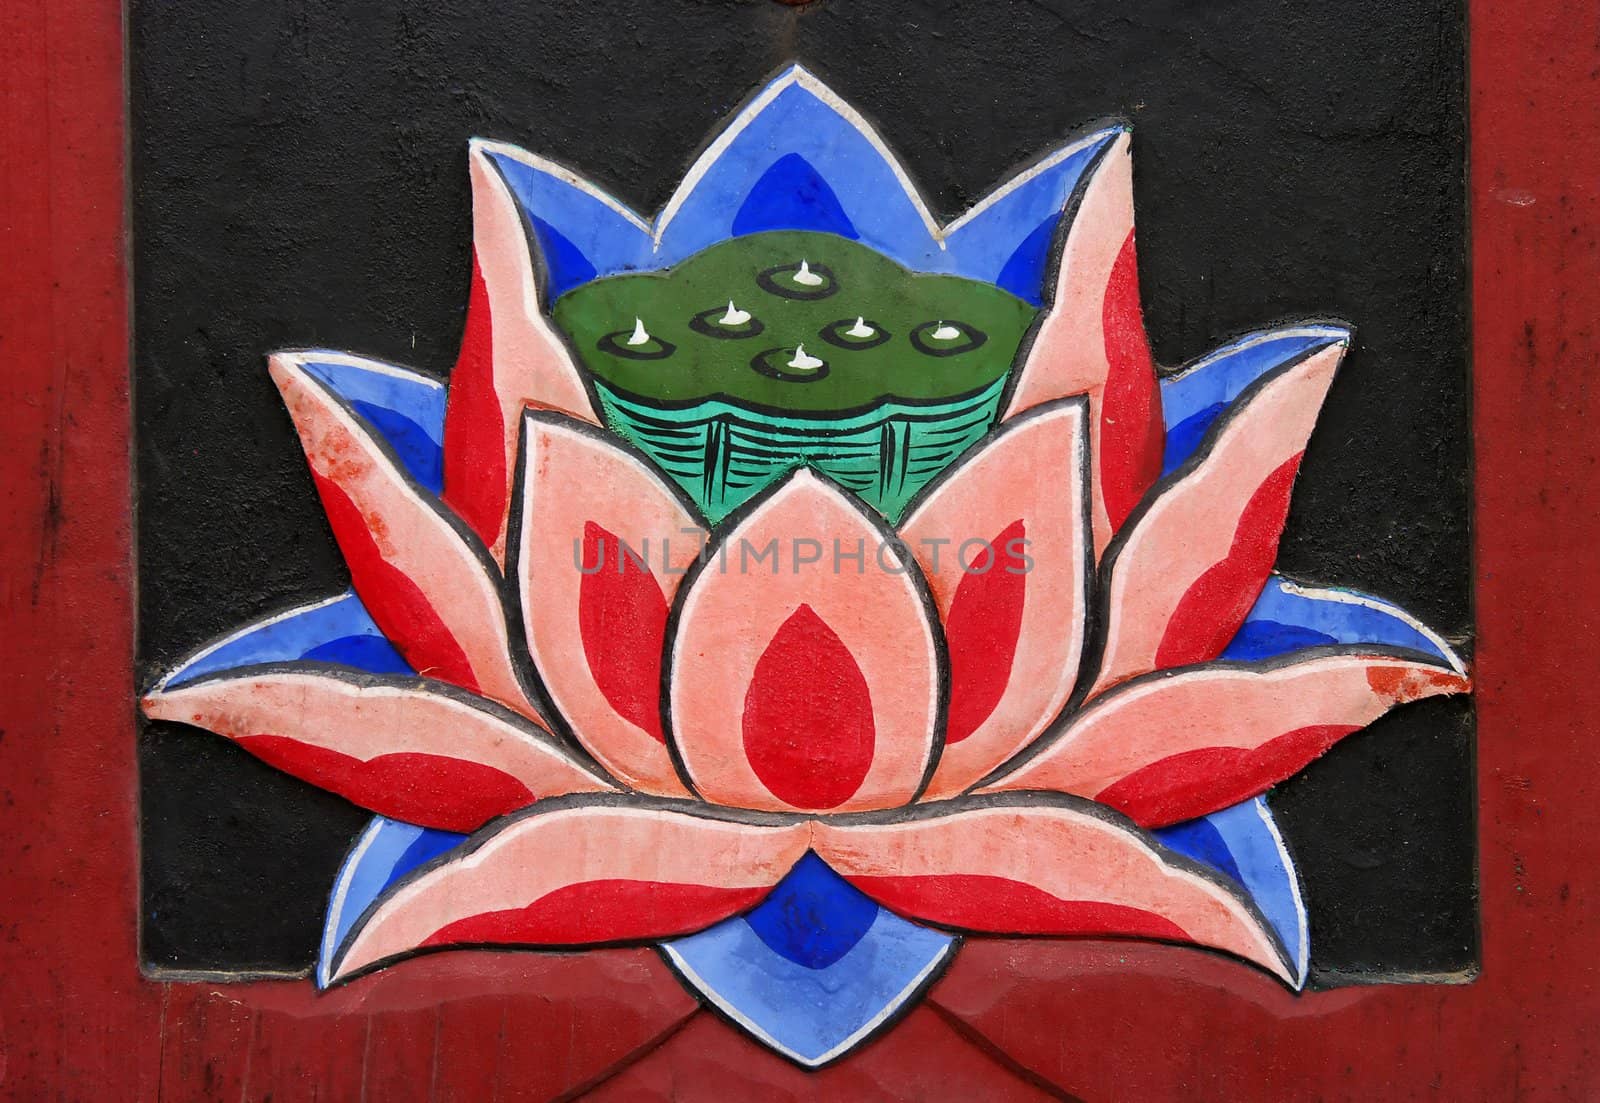 A close-up of a lotus flower painted on a Buddhist temple door. Busan, South Korea.

